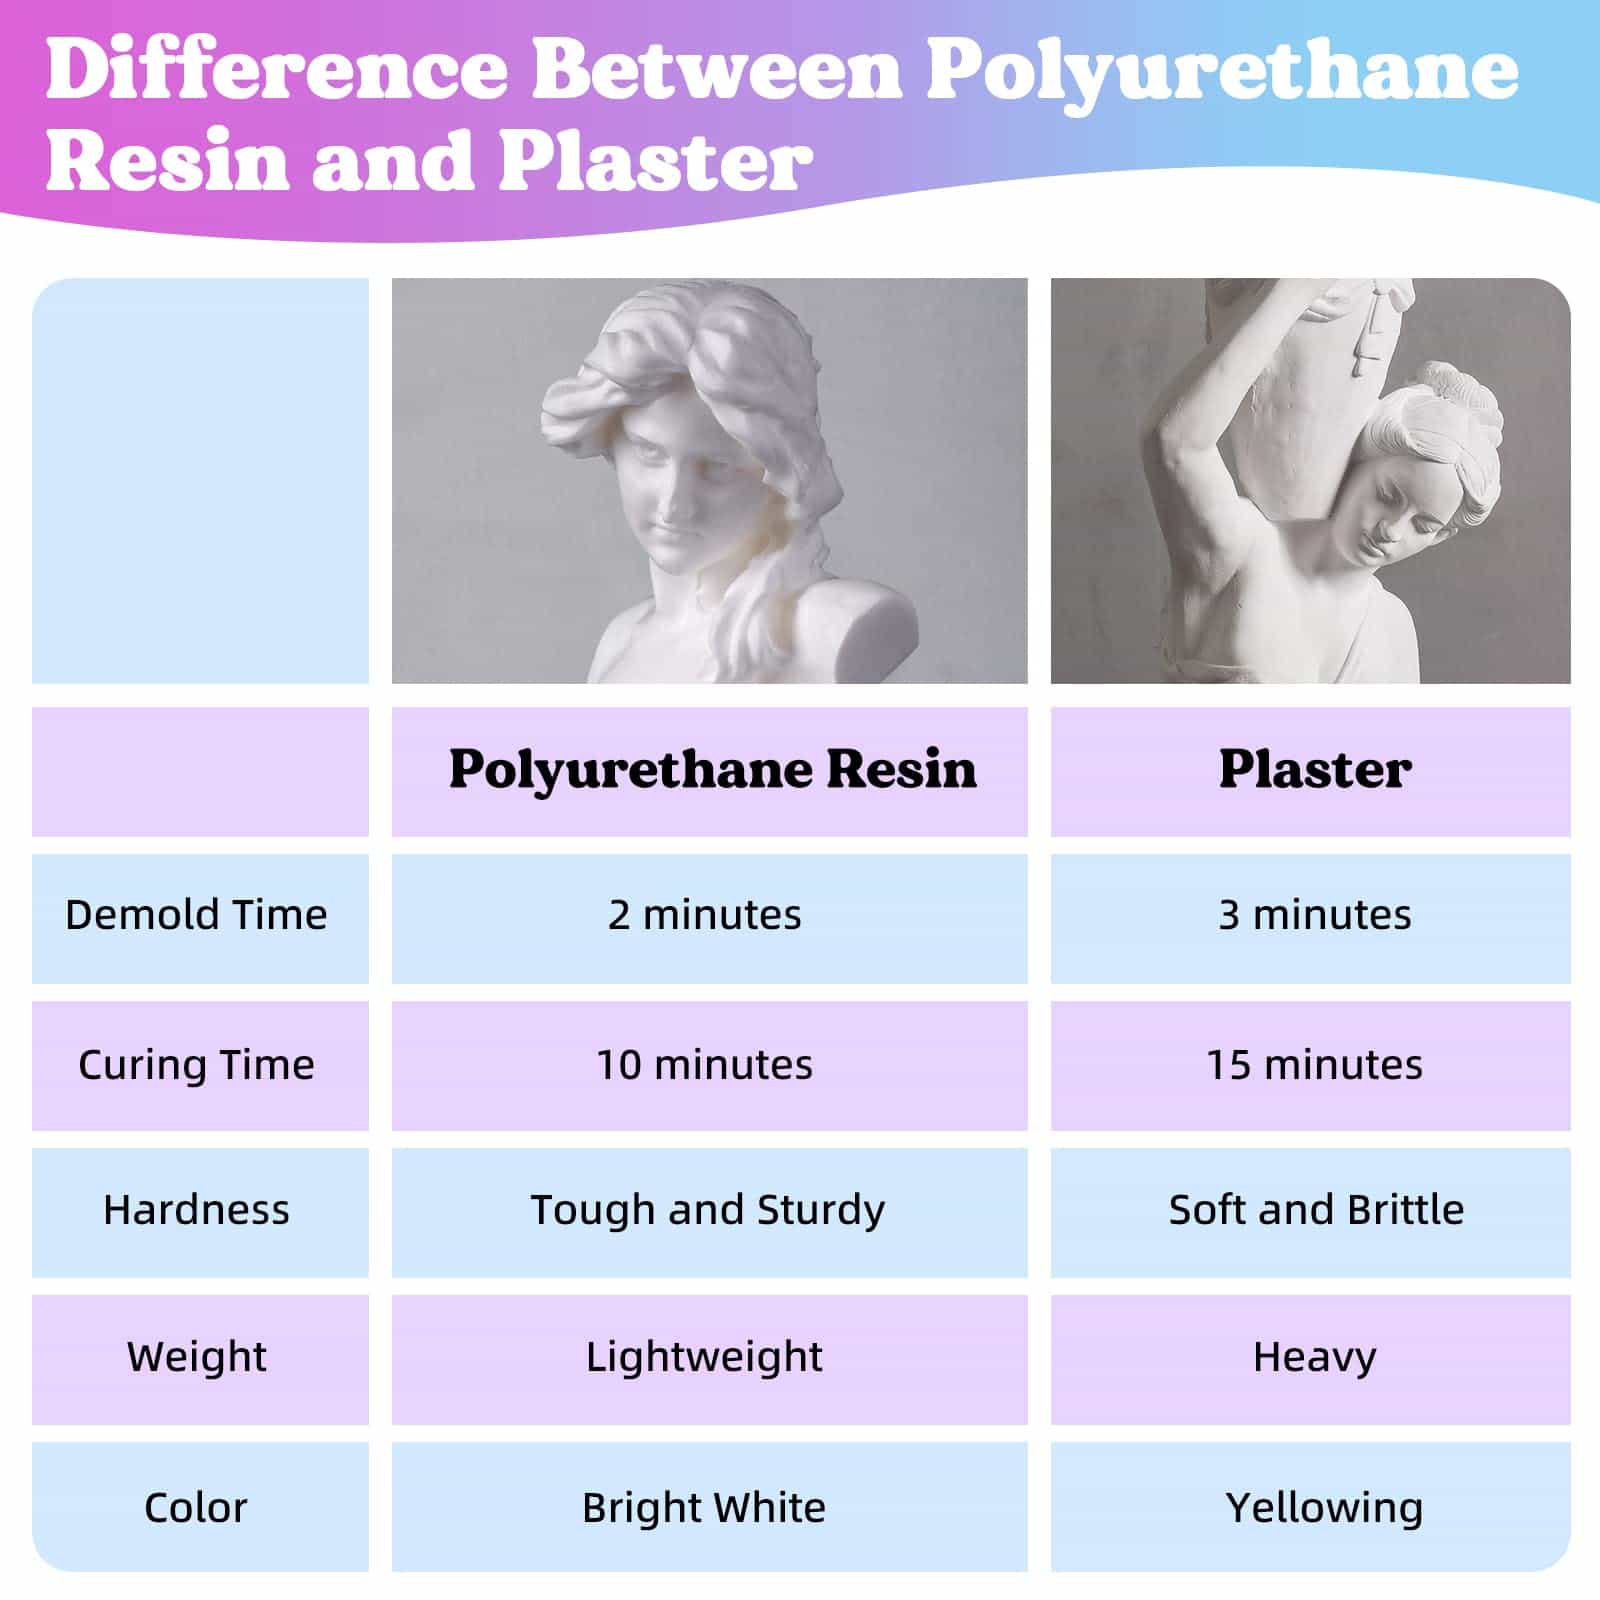 LET'S RESIN 60oz polyurethane resin is different from plaster in demold time, curing time, hardness,weight and color.